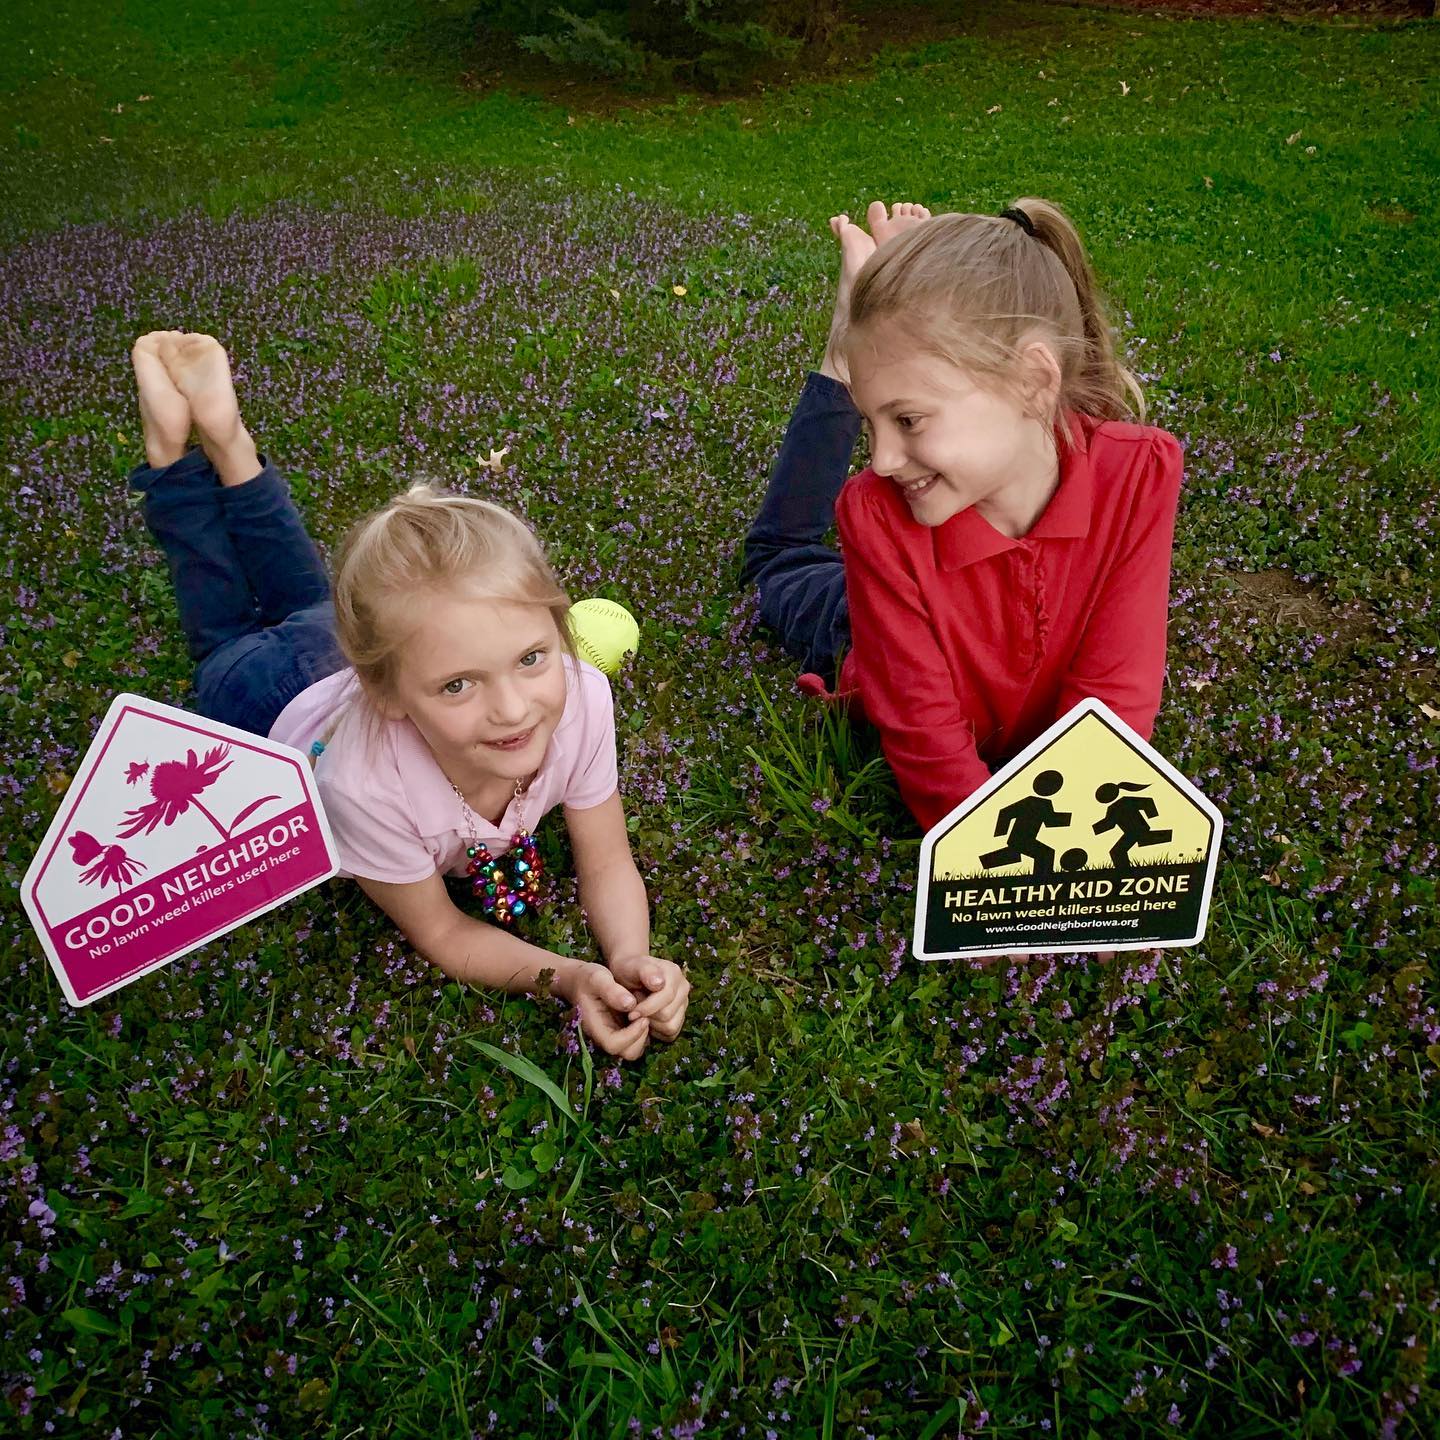 Two girls posing with Good Neighbor Iowa Lawn Signs